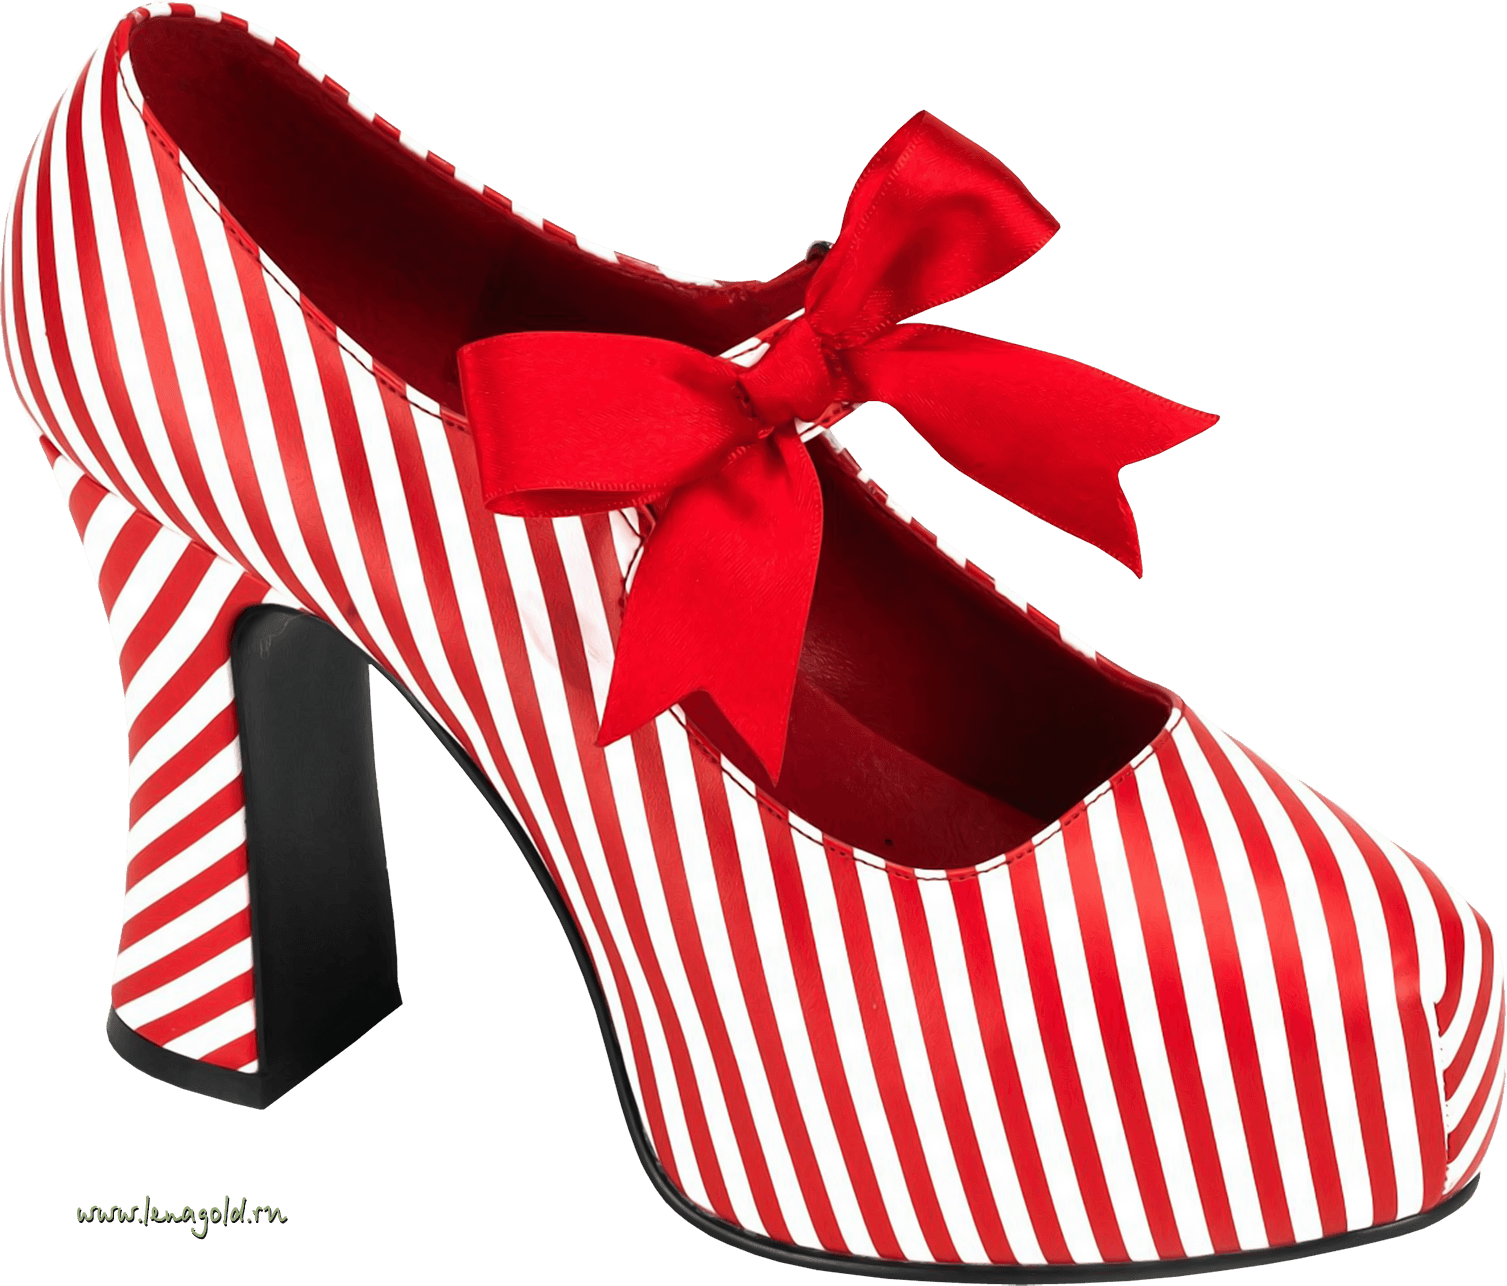 Women Shoes Png Image PNG Image